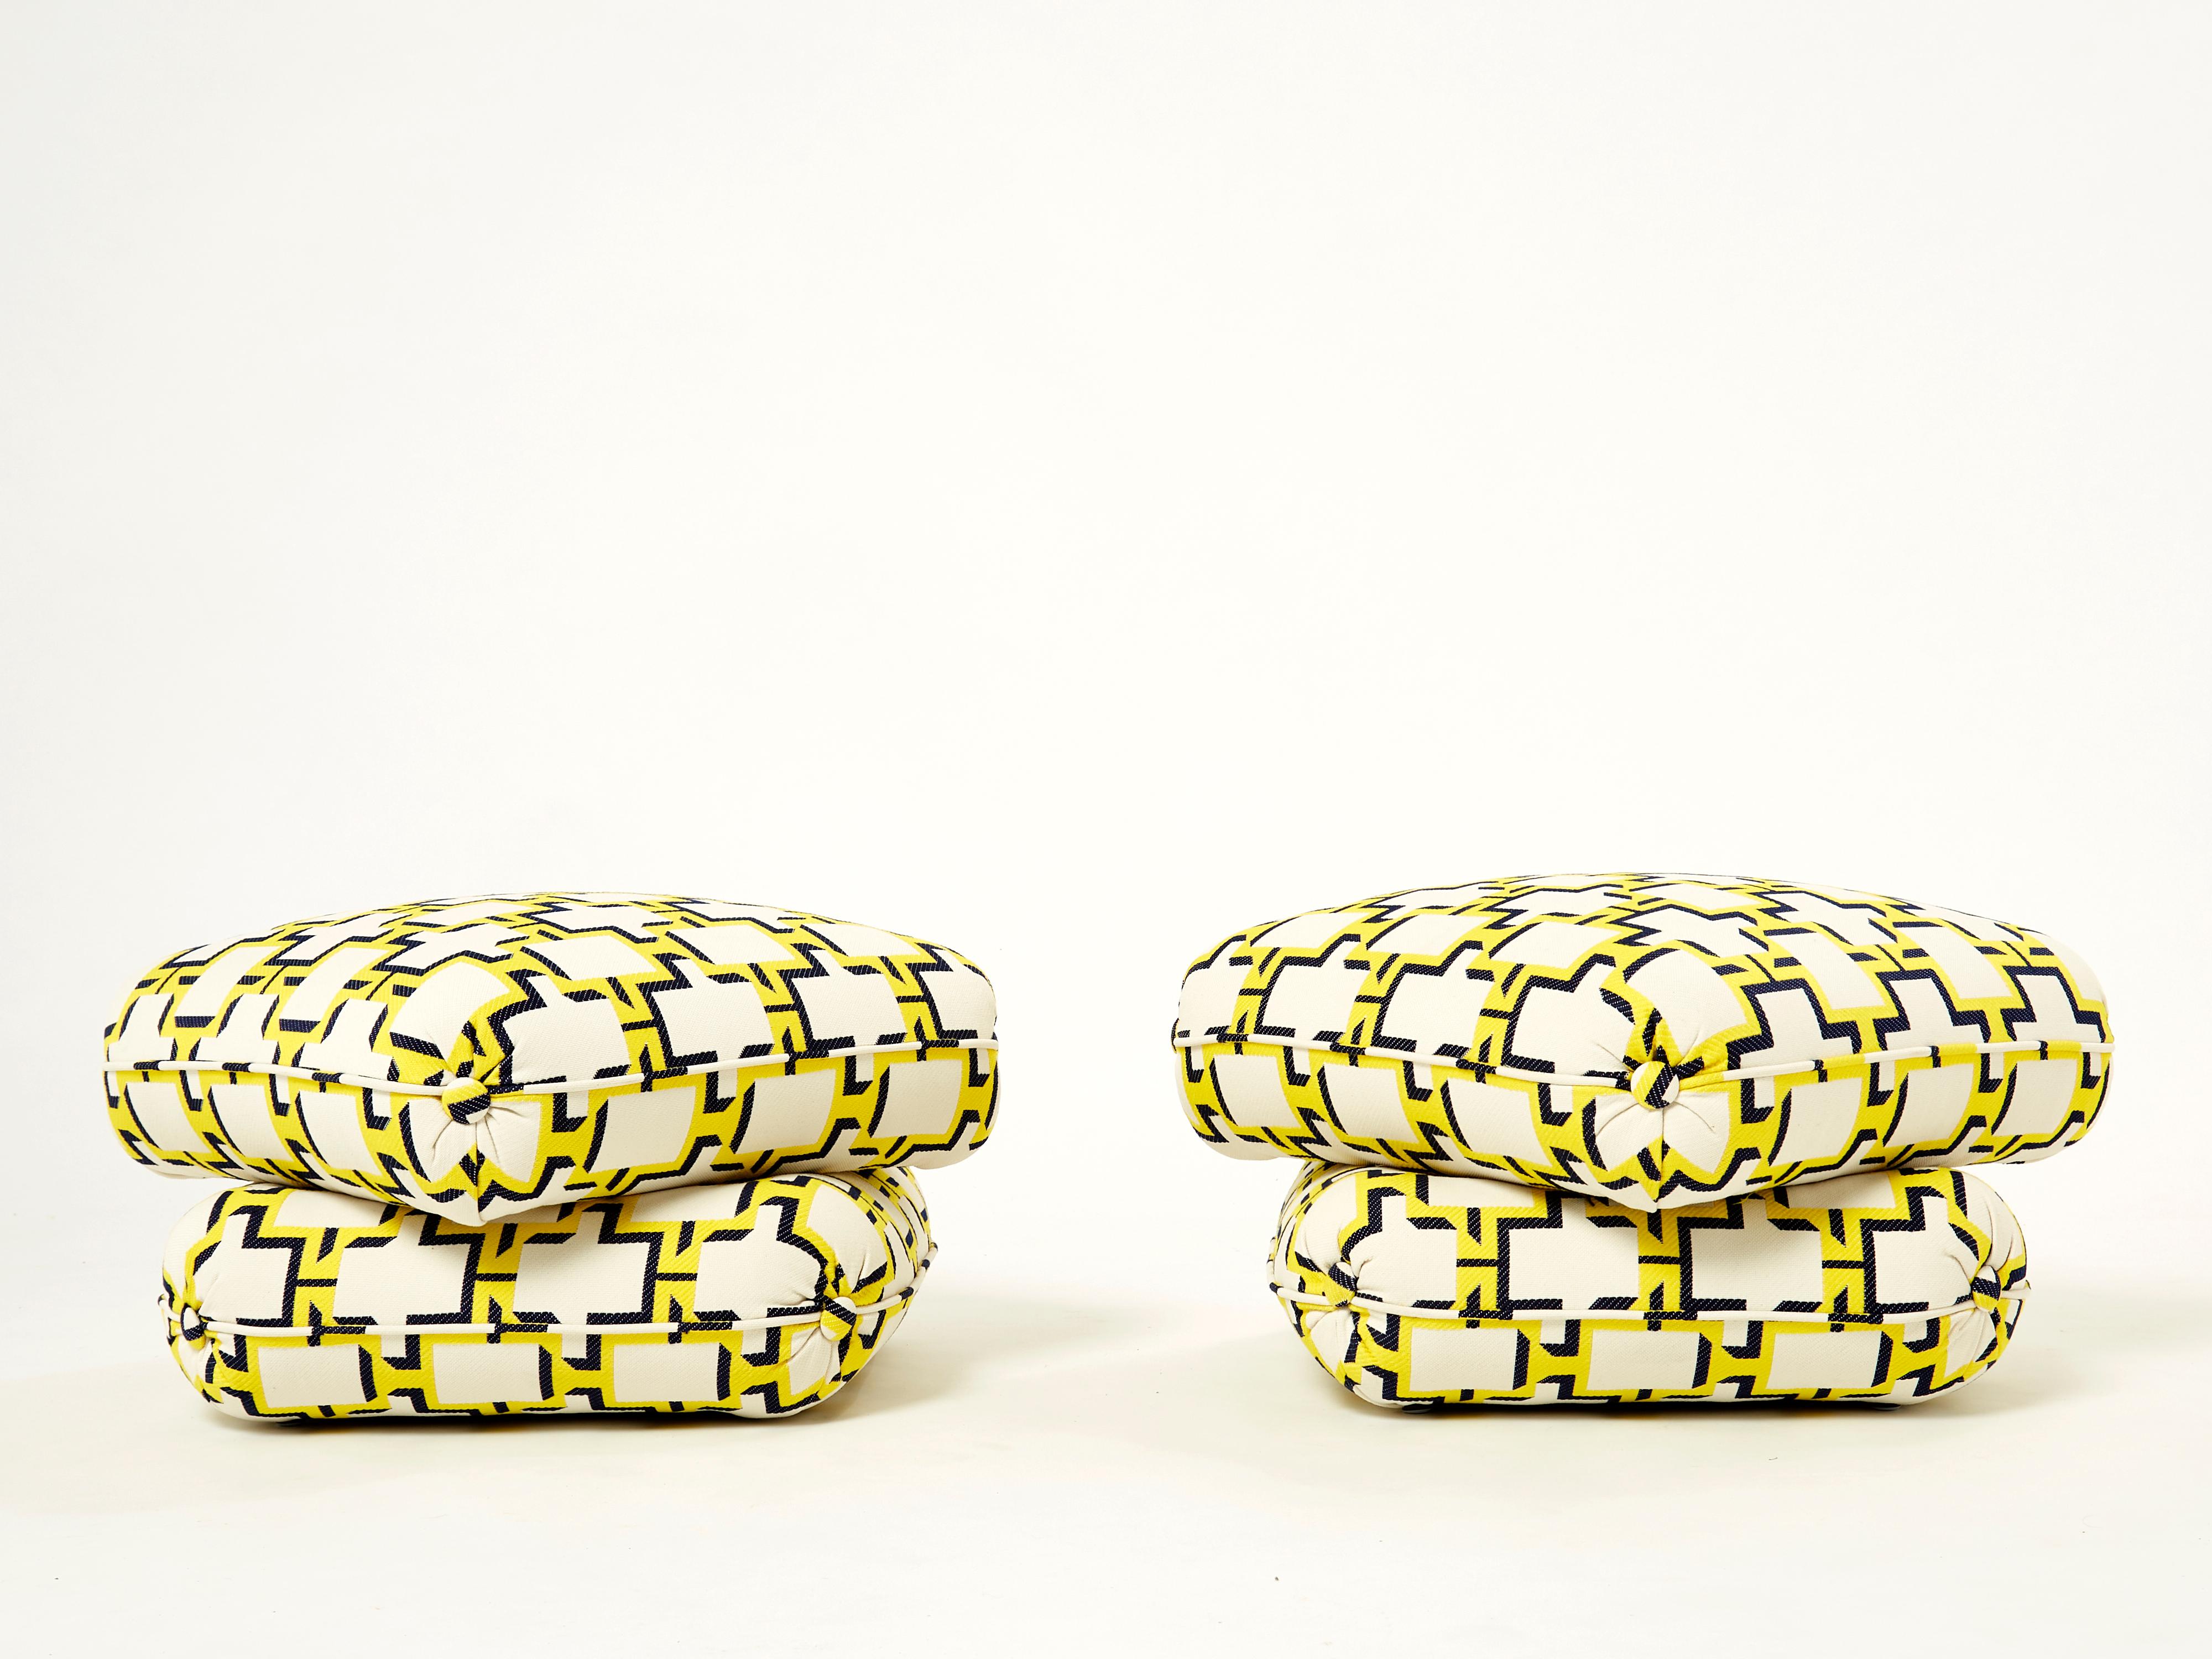 Late 20th Century Pair of Outdoor Ottomans Poufs by J. Charpentier for Maison Jansen 1970s